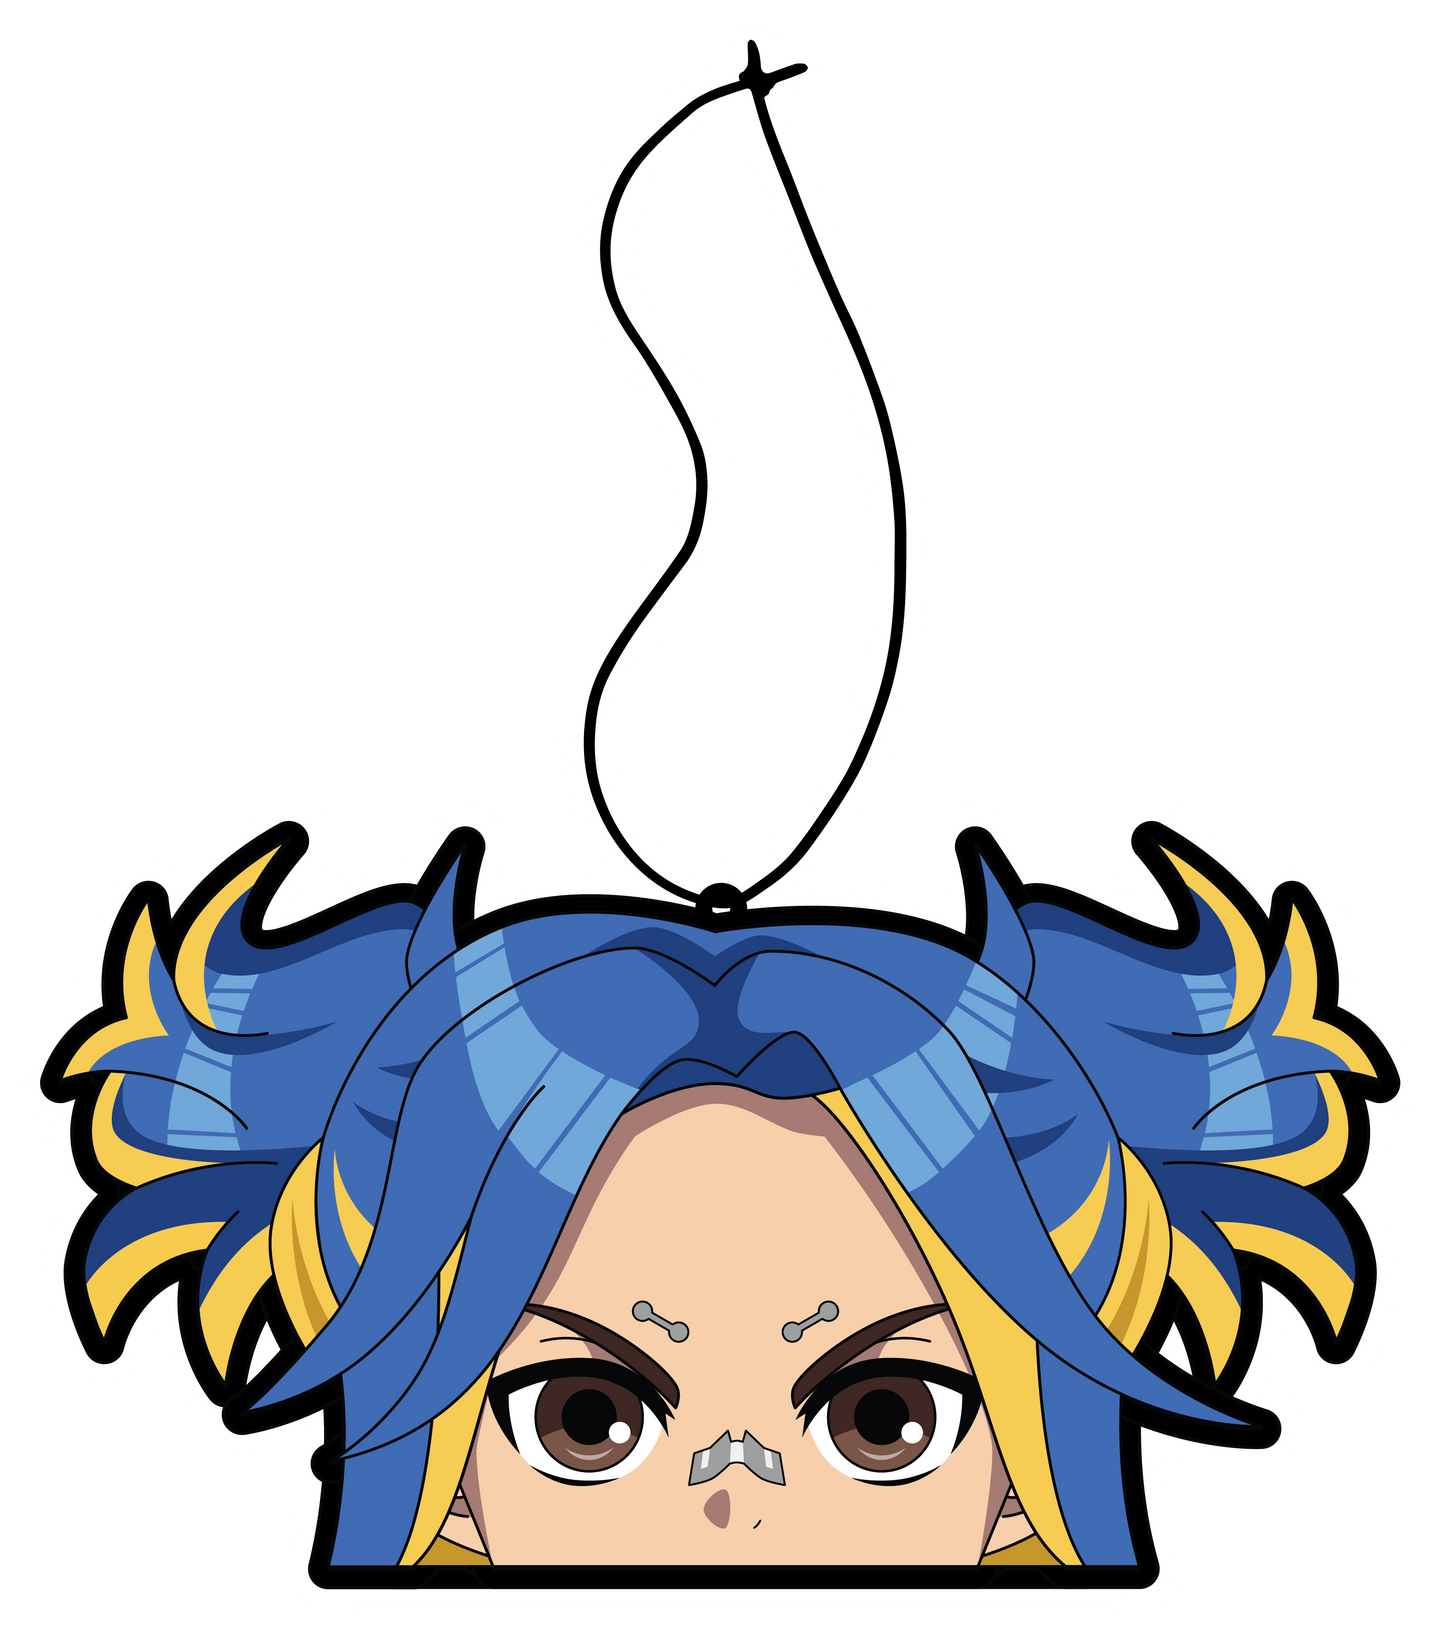 Anime Neon Air Freshener Bubble Gum Scent. Blue with  yellow highlights pony tail with eye brow piercing and nose bandage brown eyes air freshener hanging from black string. 